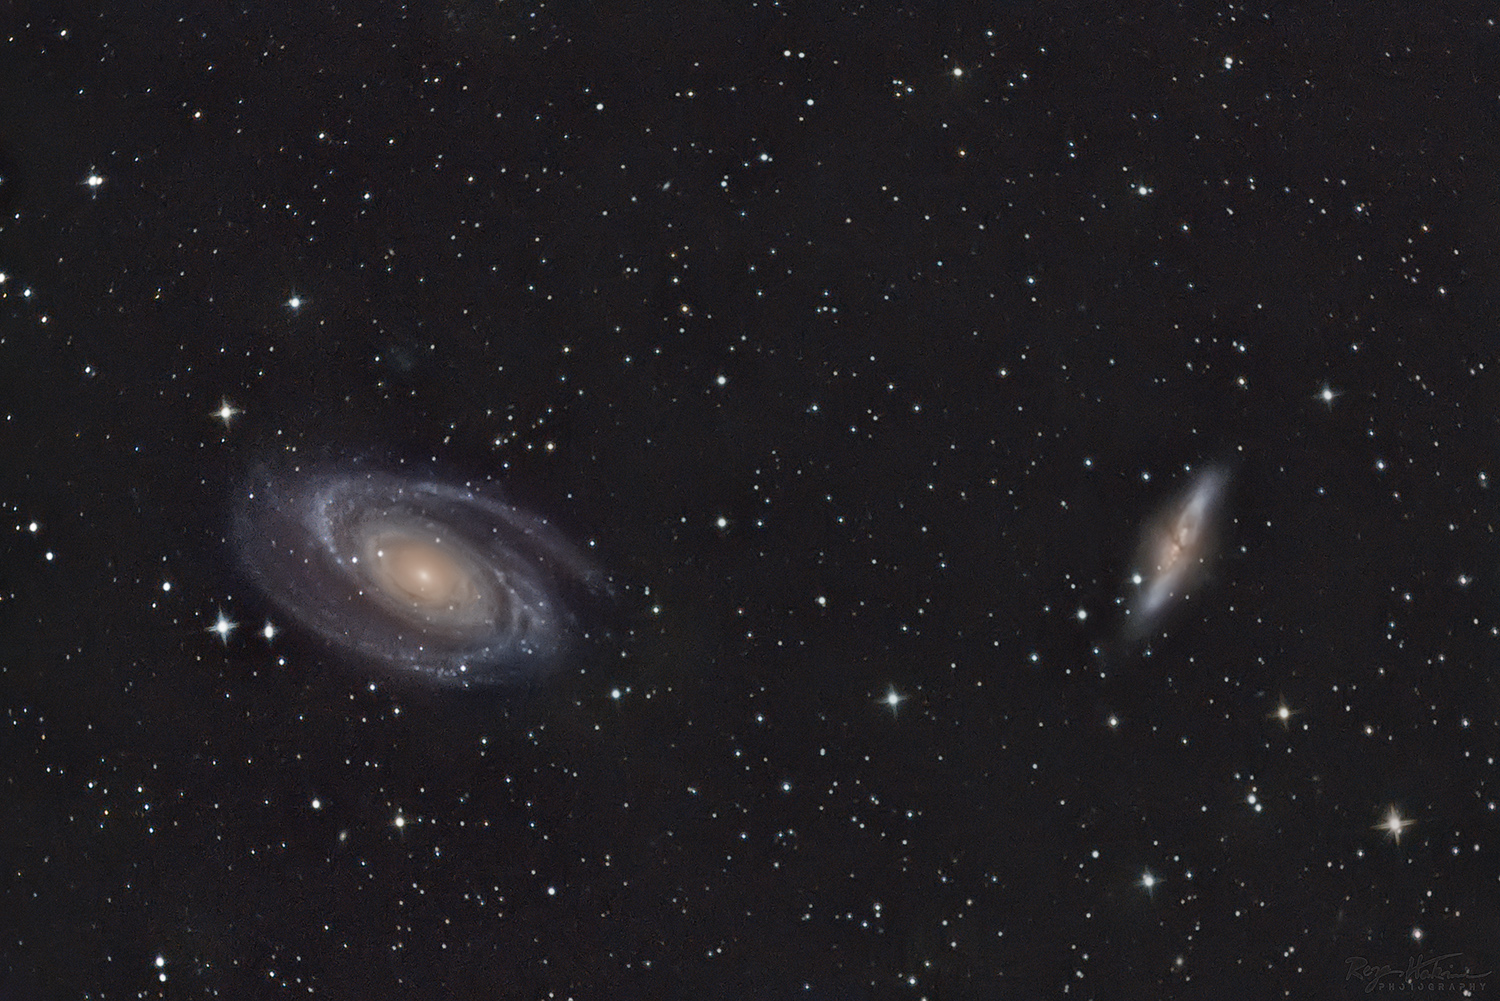 M81 & M82 - Bode and Cigar Galaxies